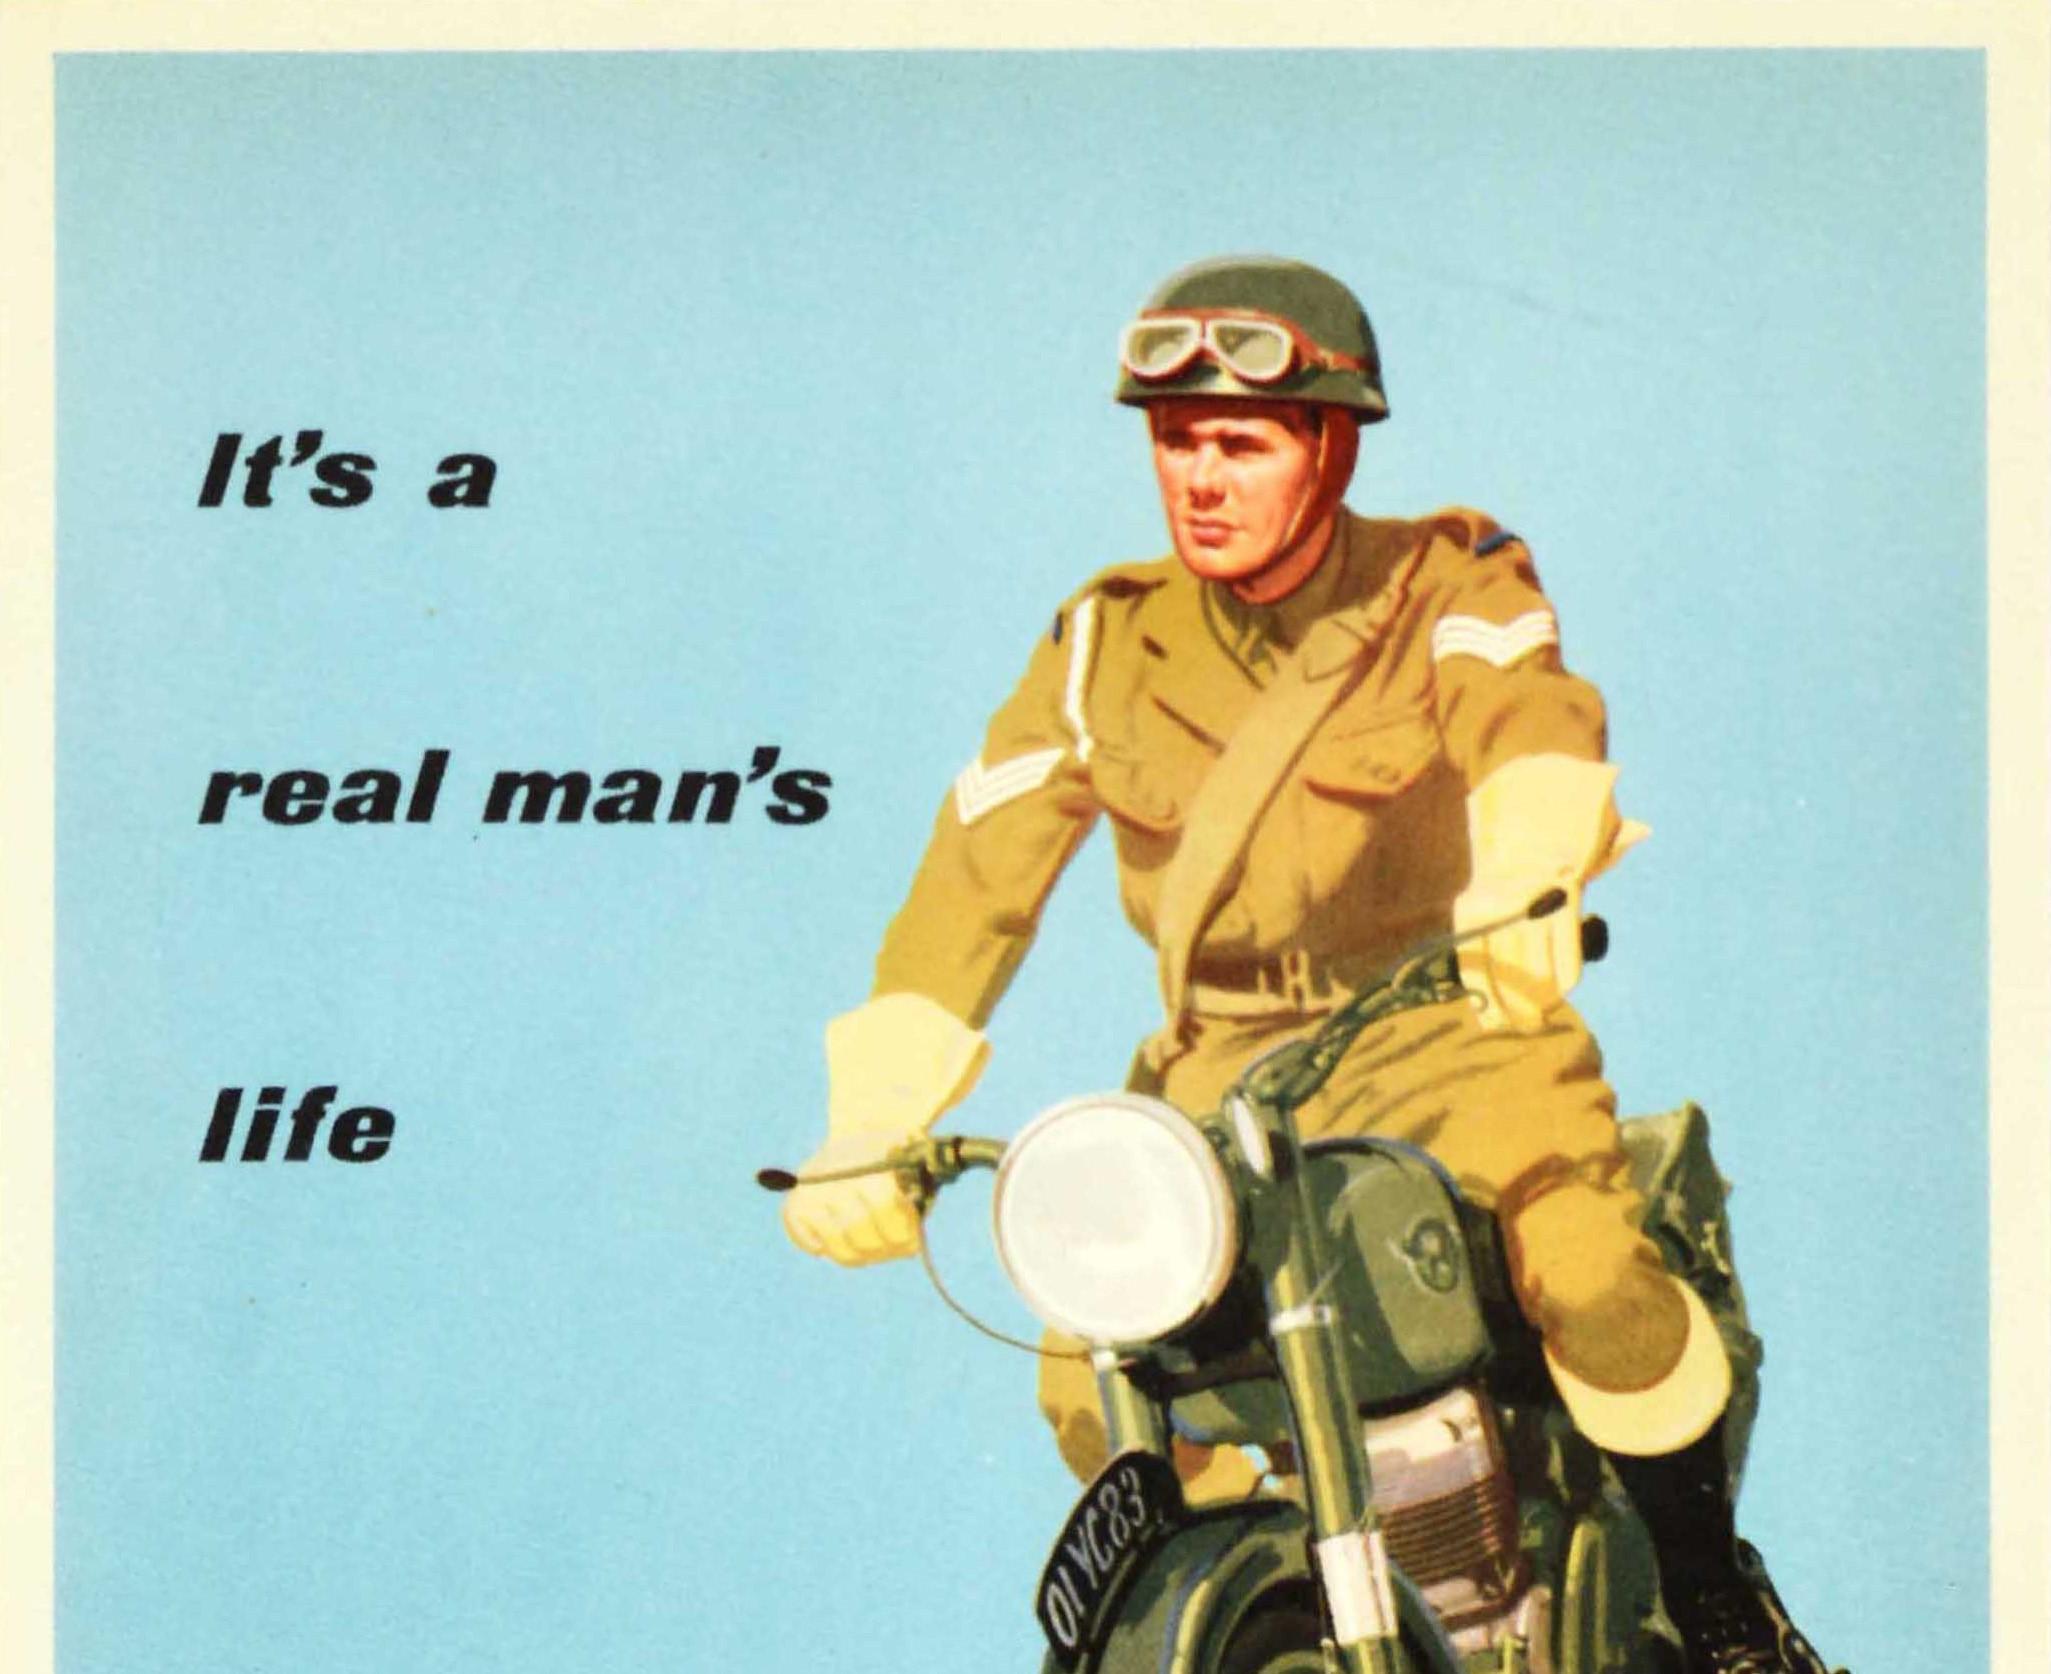 Original vintage British military recruitment poster - It's a real man's life Join the Regular Army - featuring a man in uniform on a motorcycle against a blue background with the text on the side and below. Prepared for the War Office by the